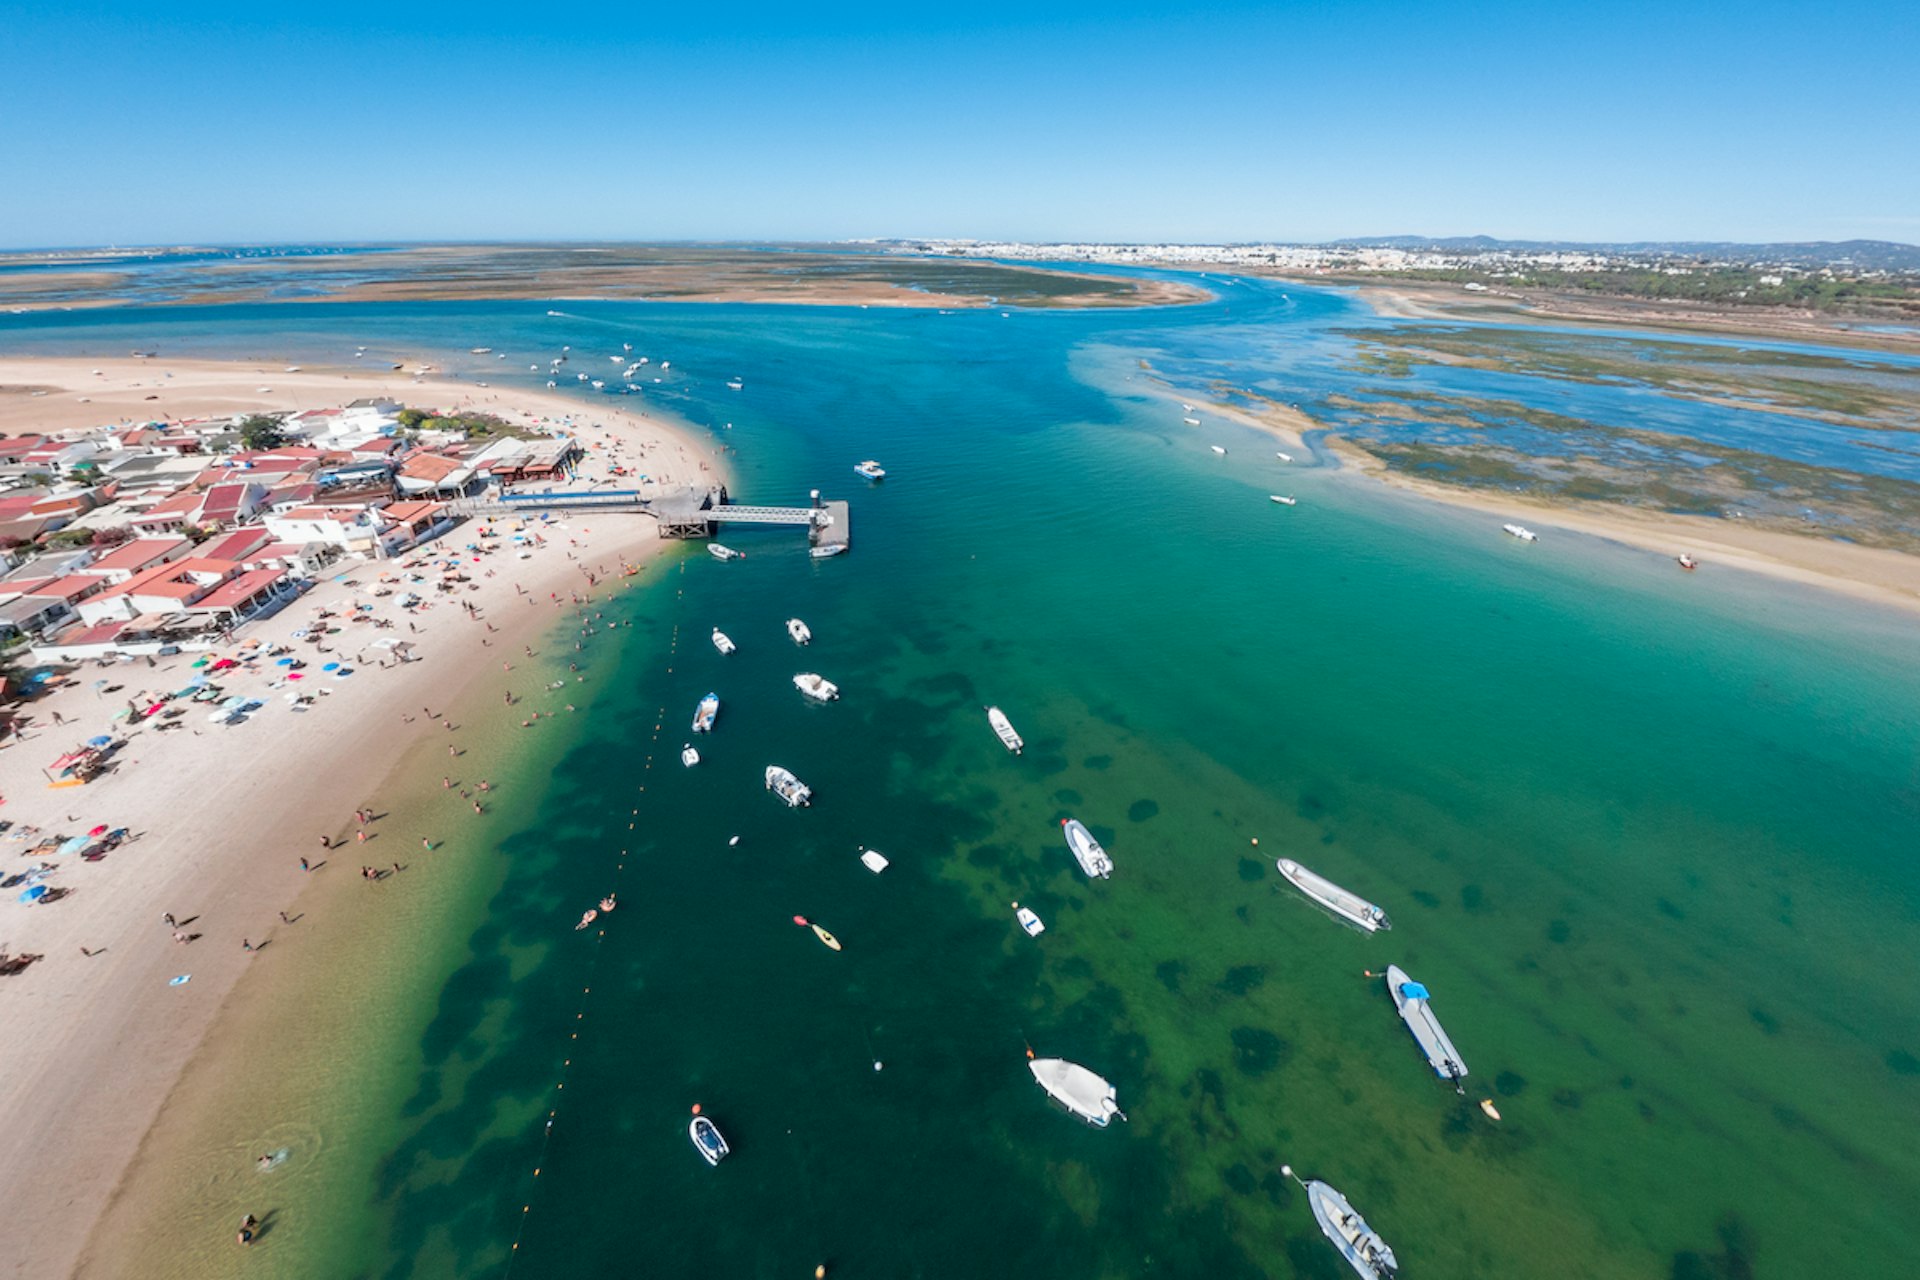 An aerial view with boats off the shore of the port of Armona Island, Ria Formosa, the Algarve, Portugal